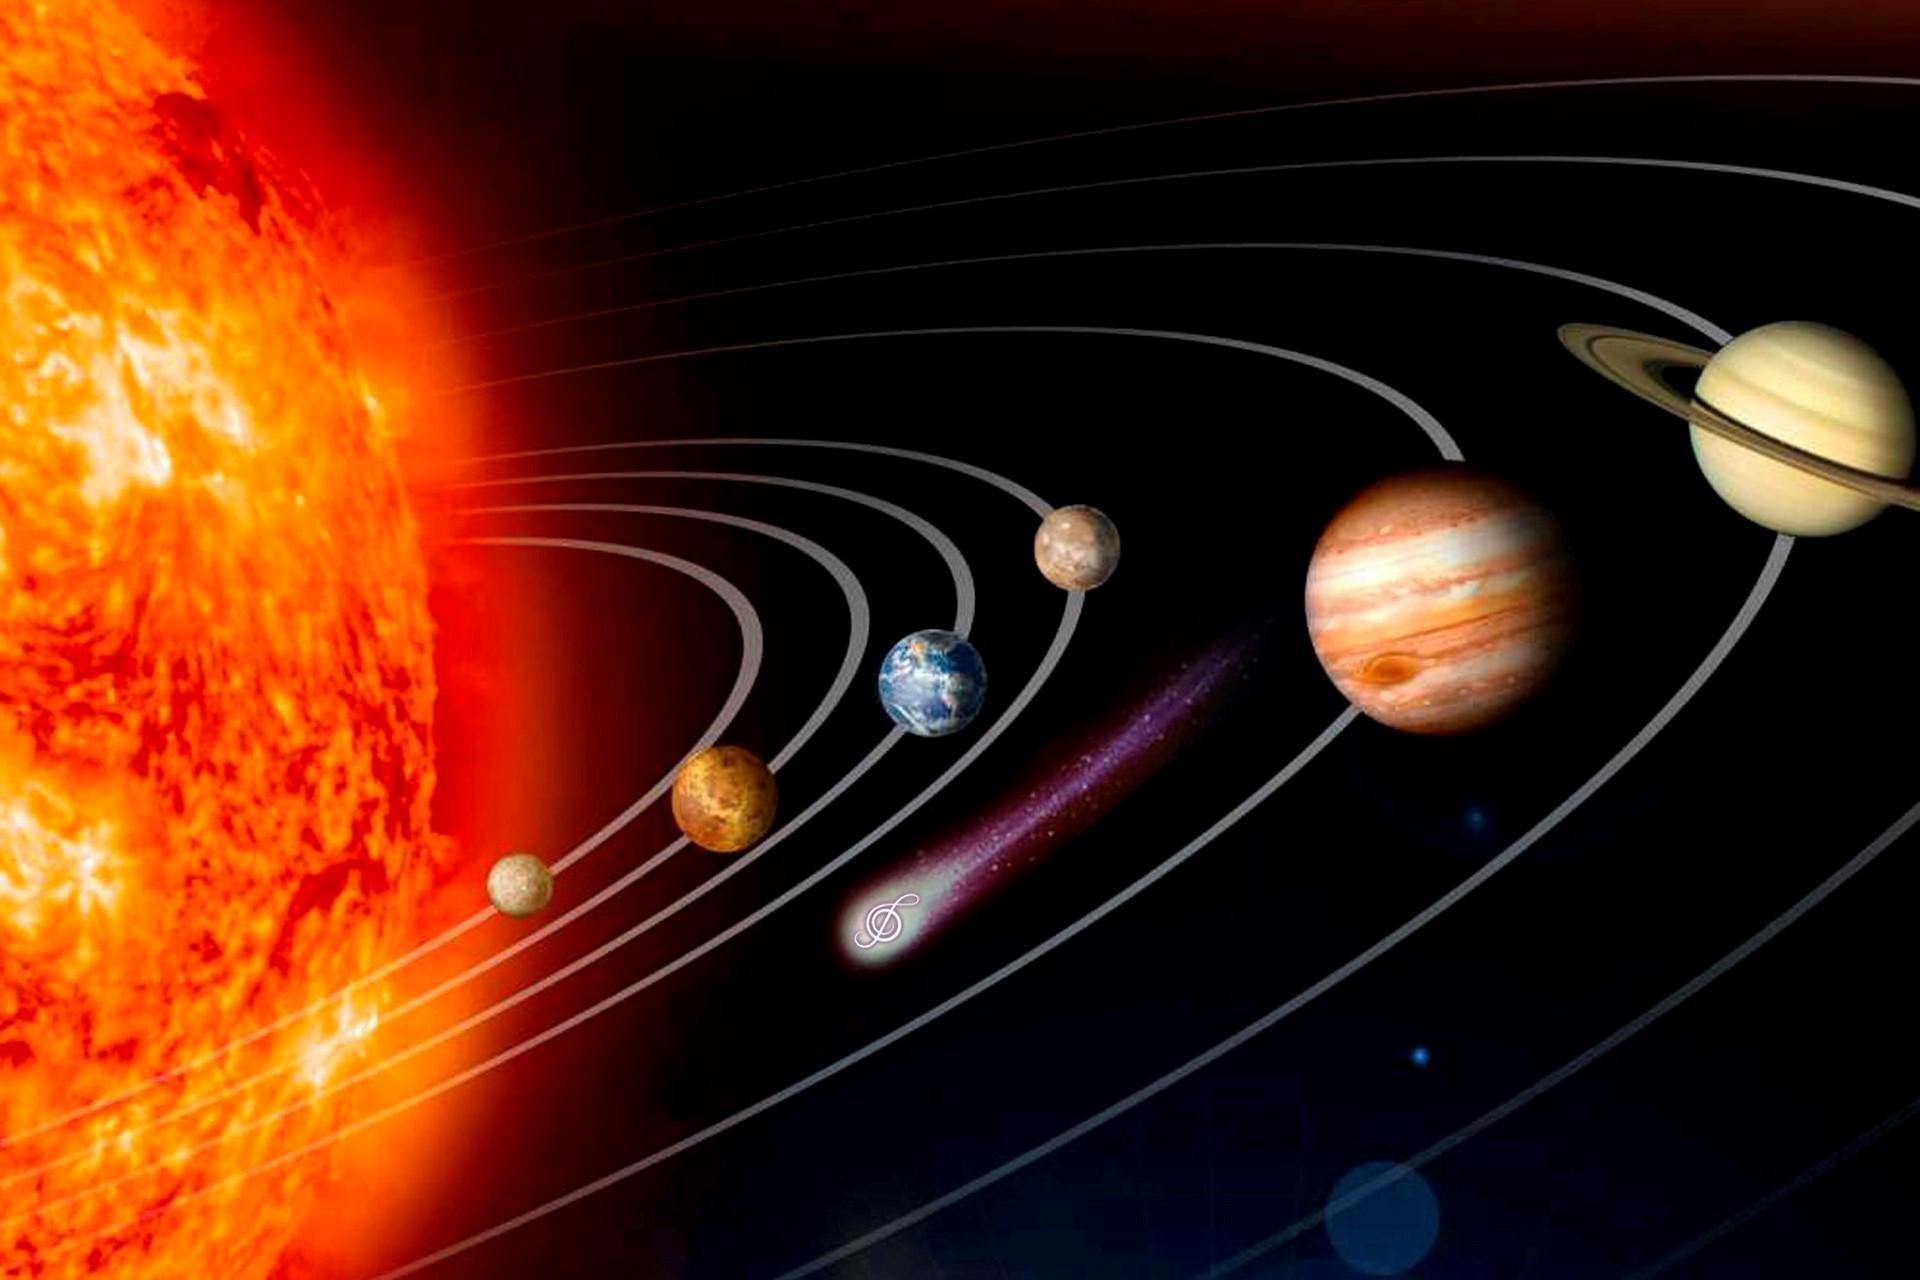 The Solar System and the comet